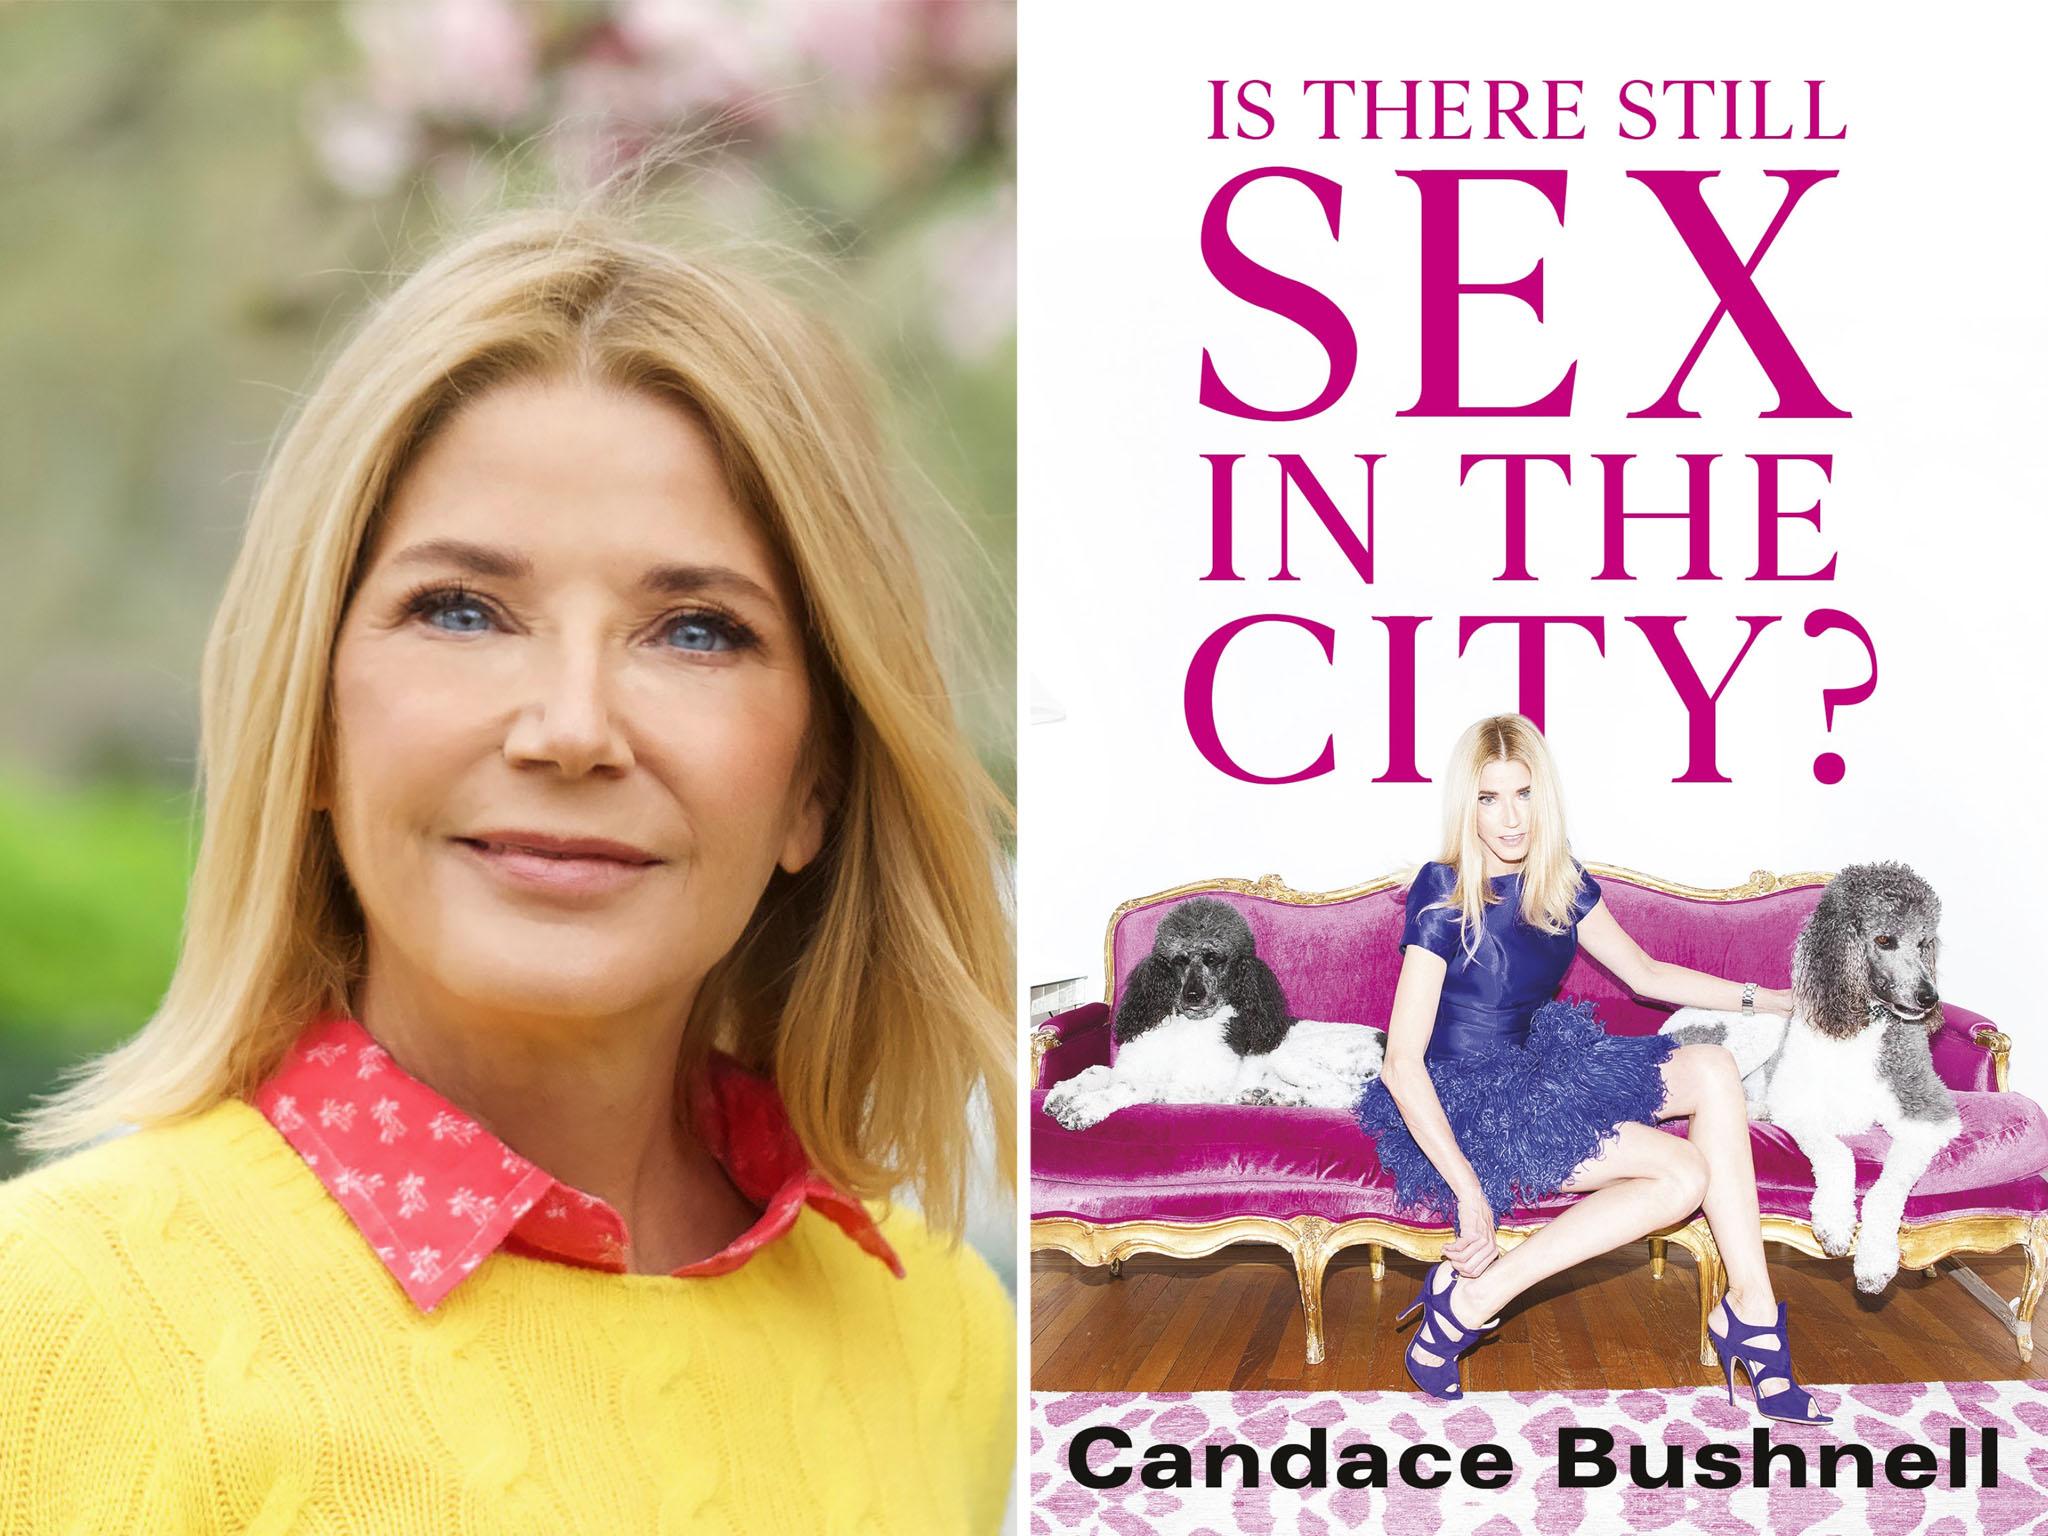 Dracula Xxx Death Killing Porno Videos - Is There Still Sex in the City? by Candace Bushnell, review: It's ...